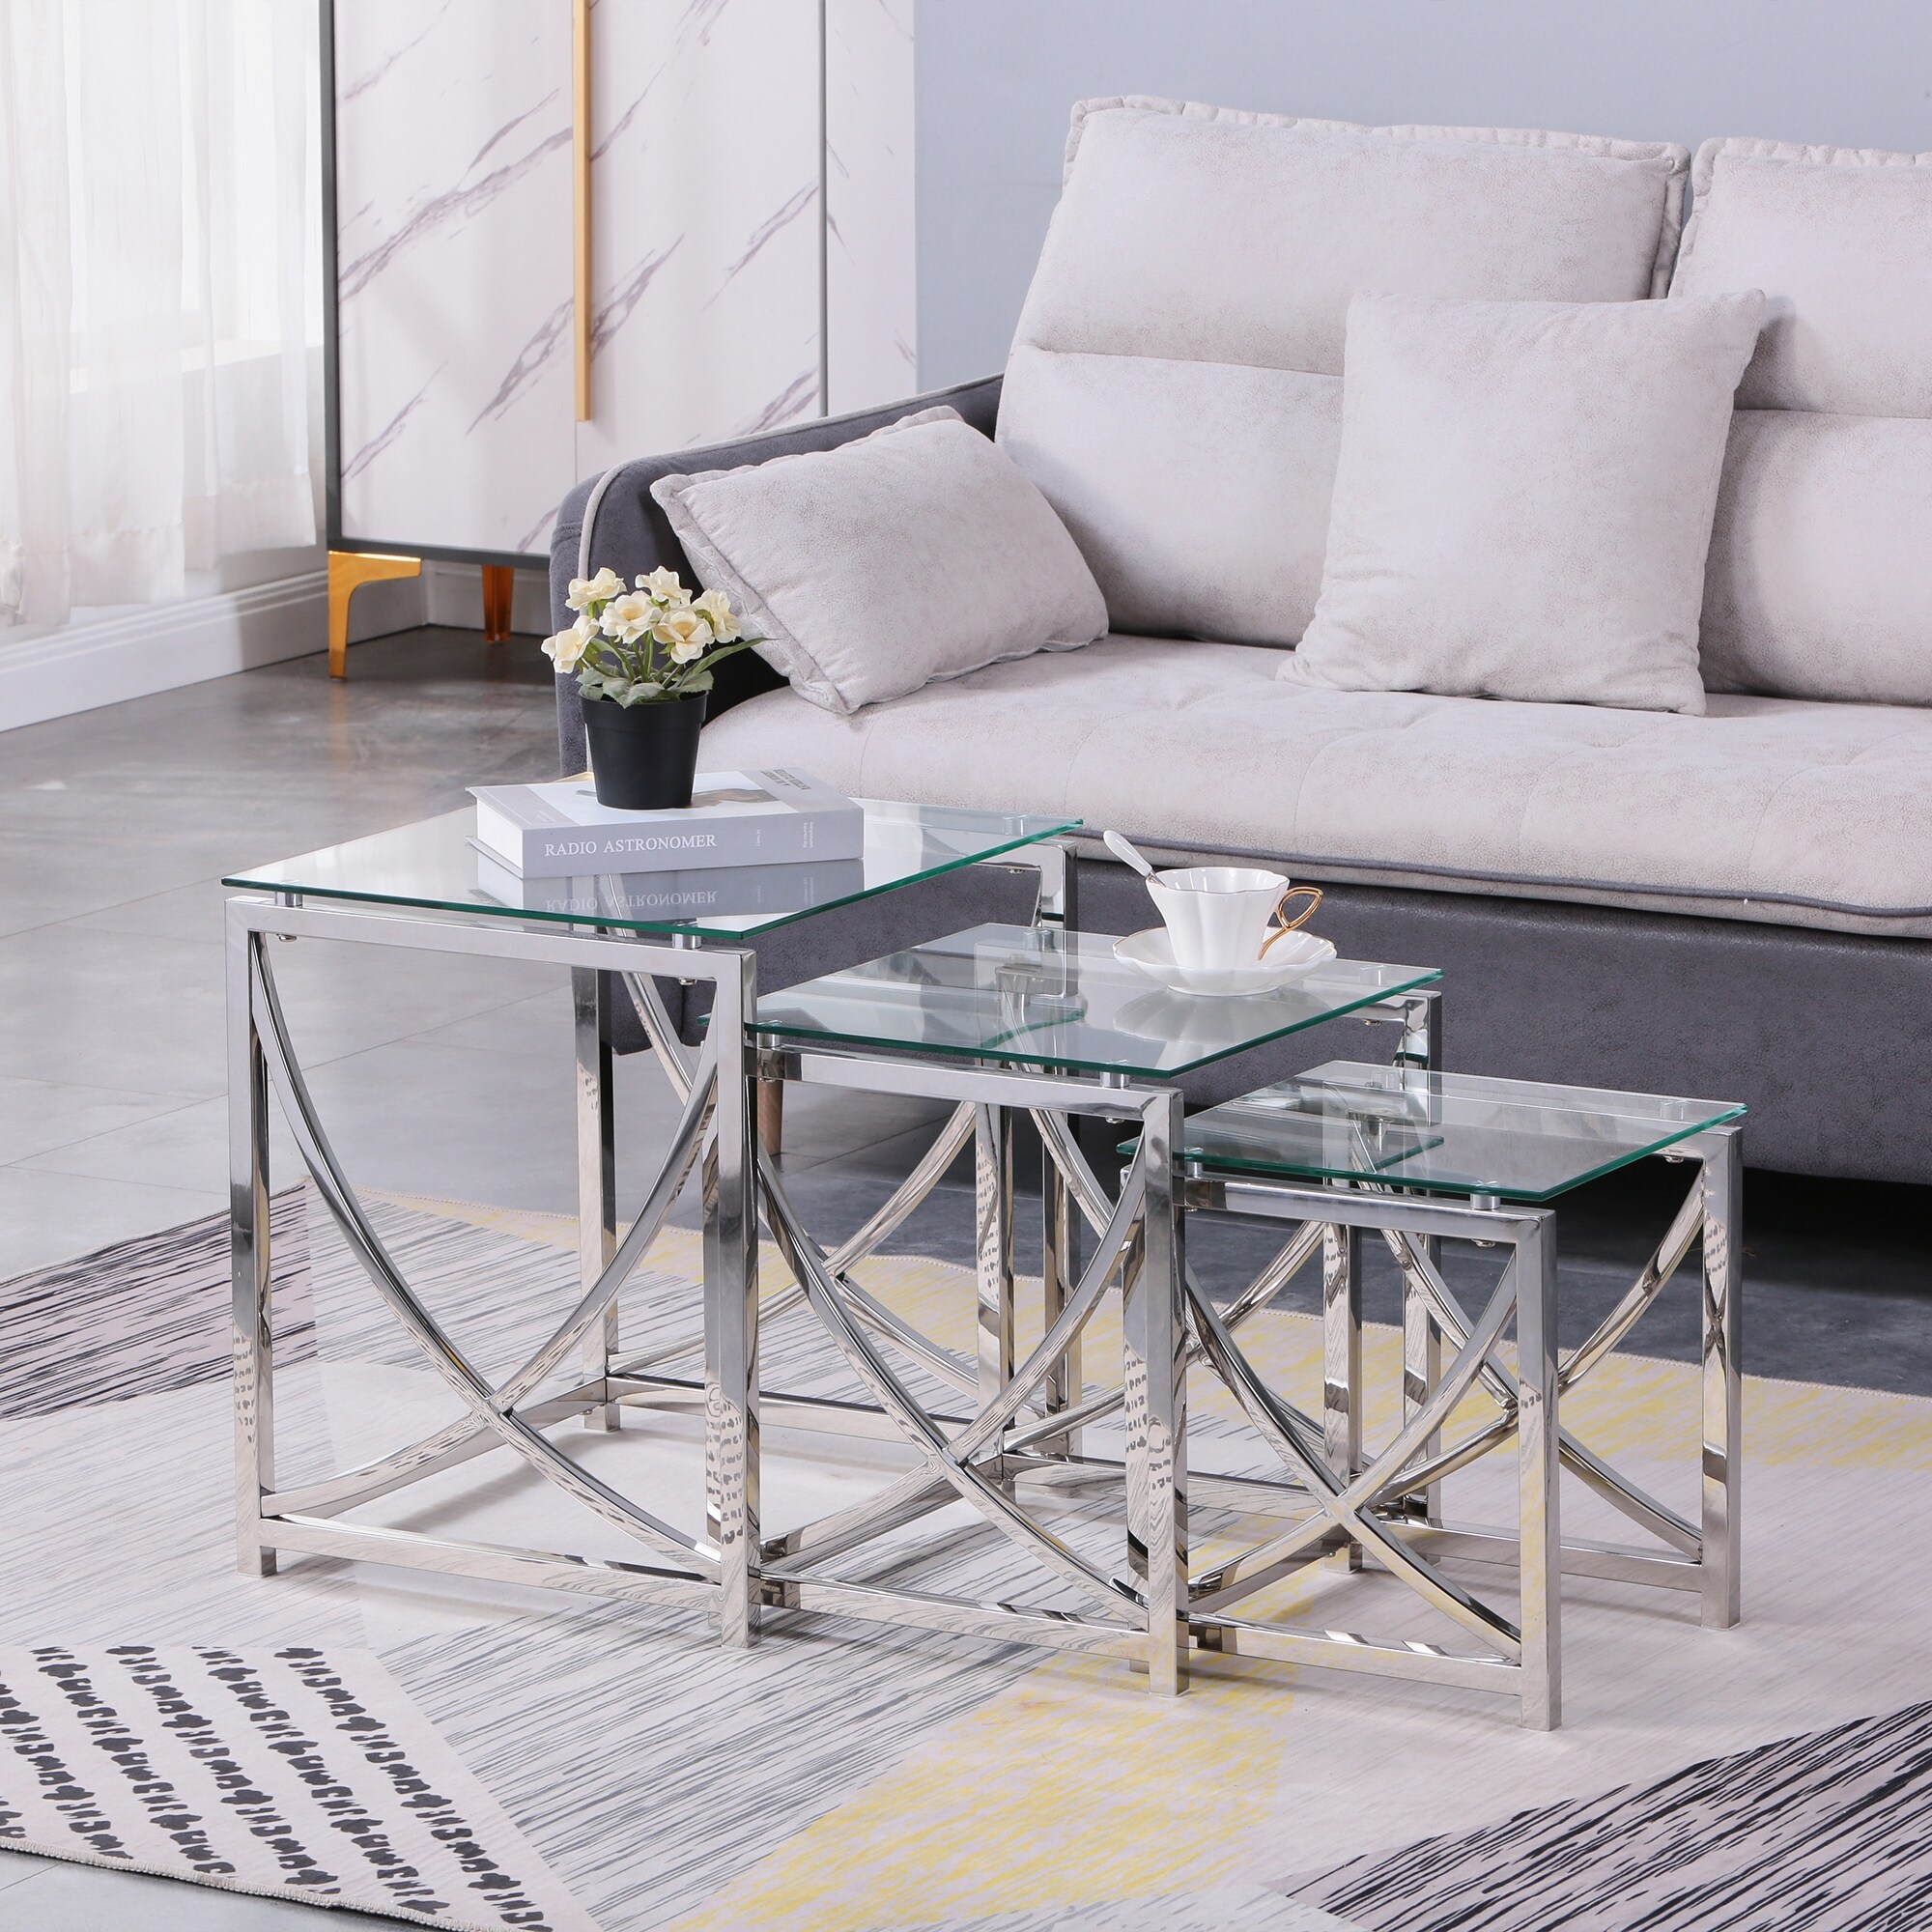 Clihome 3 Pieces Silver Nesting Glass Coffee End Tables for Living Room